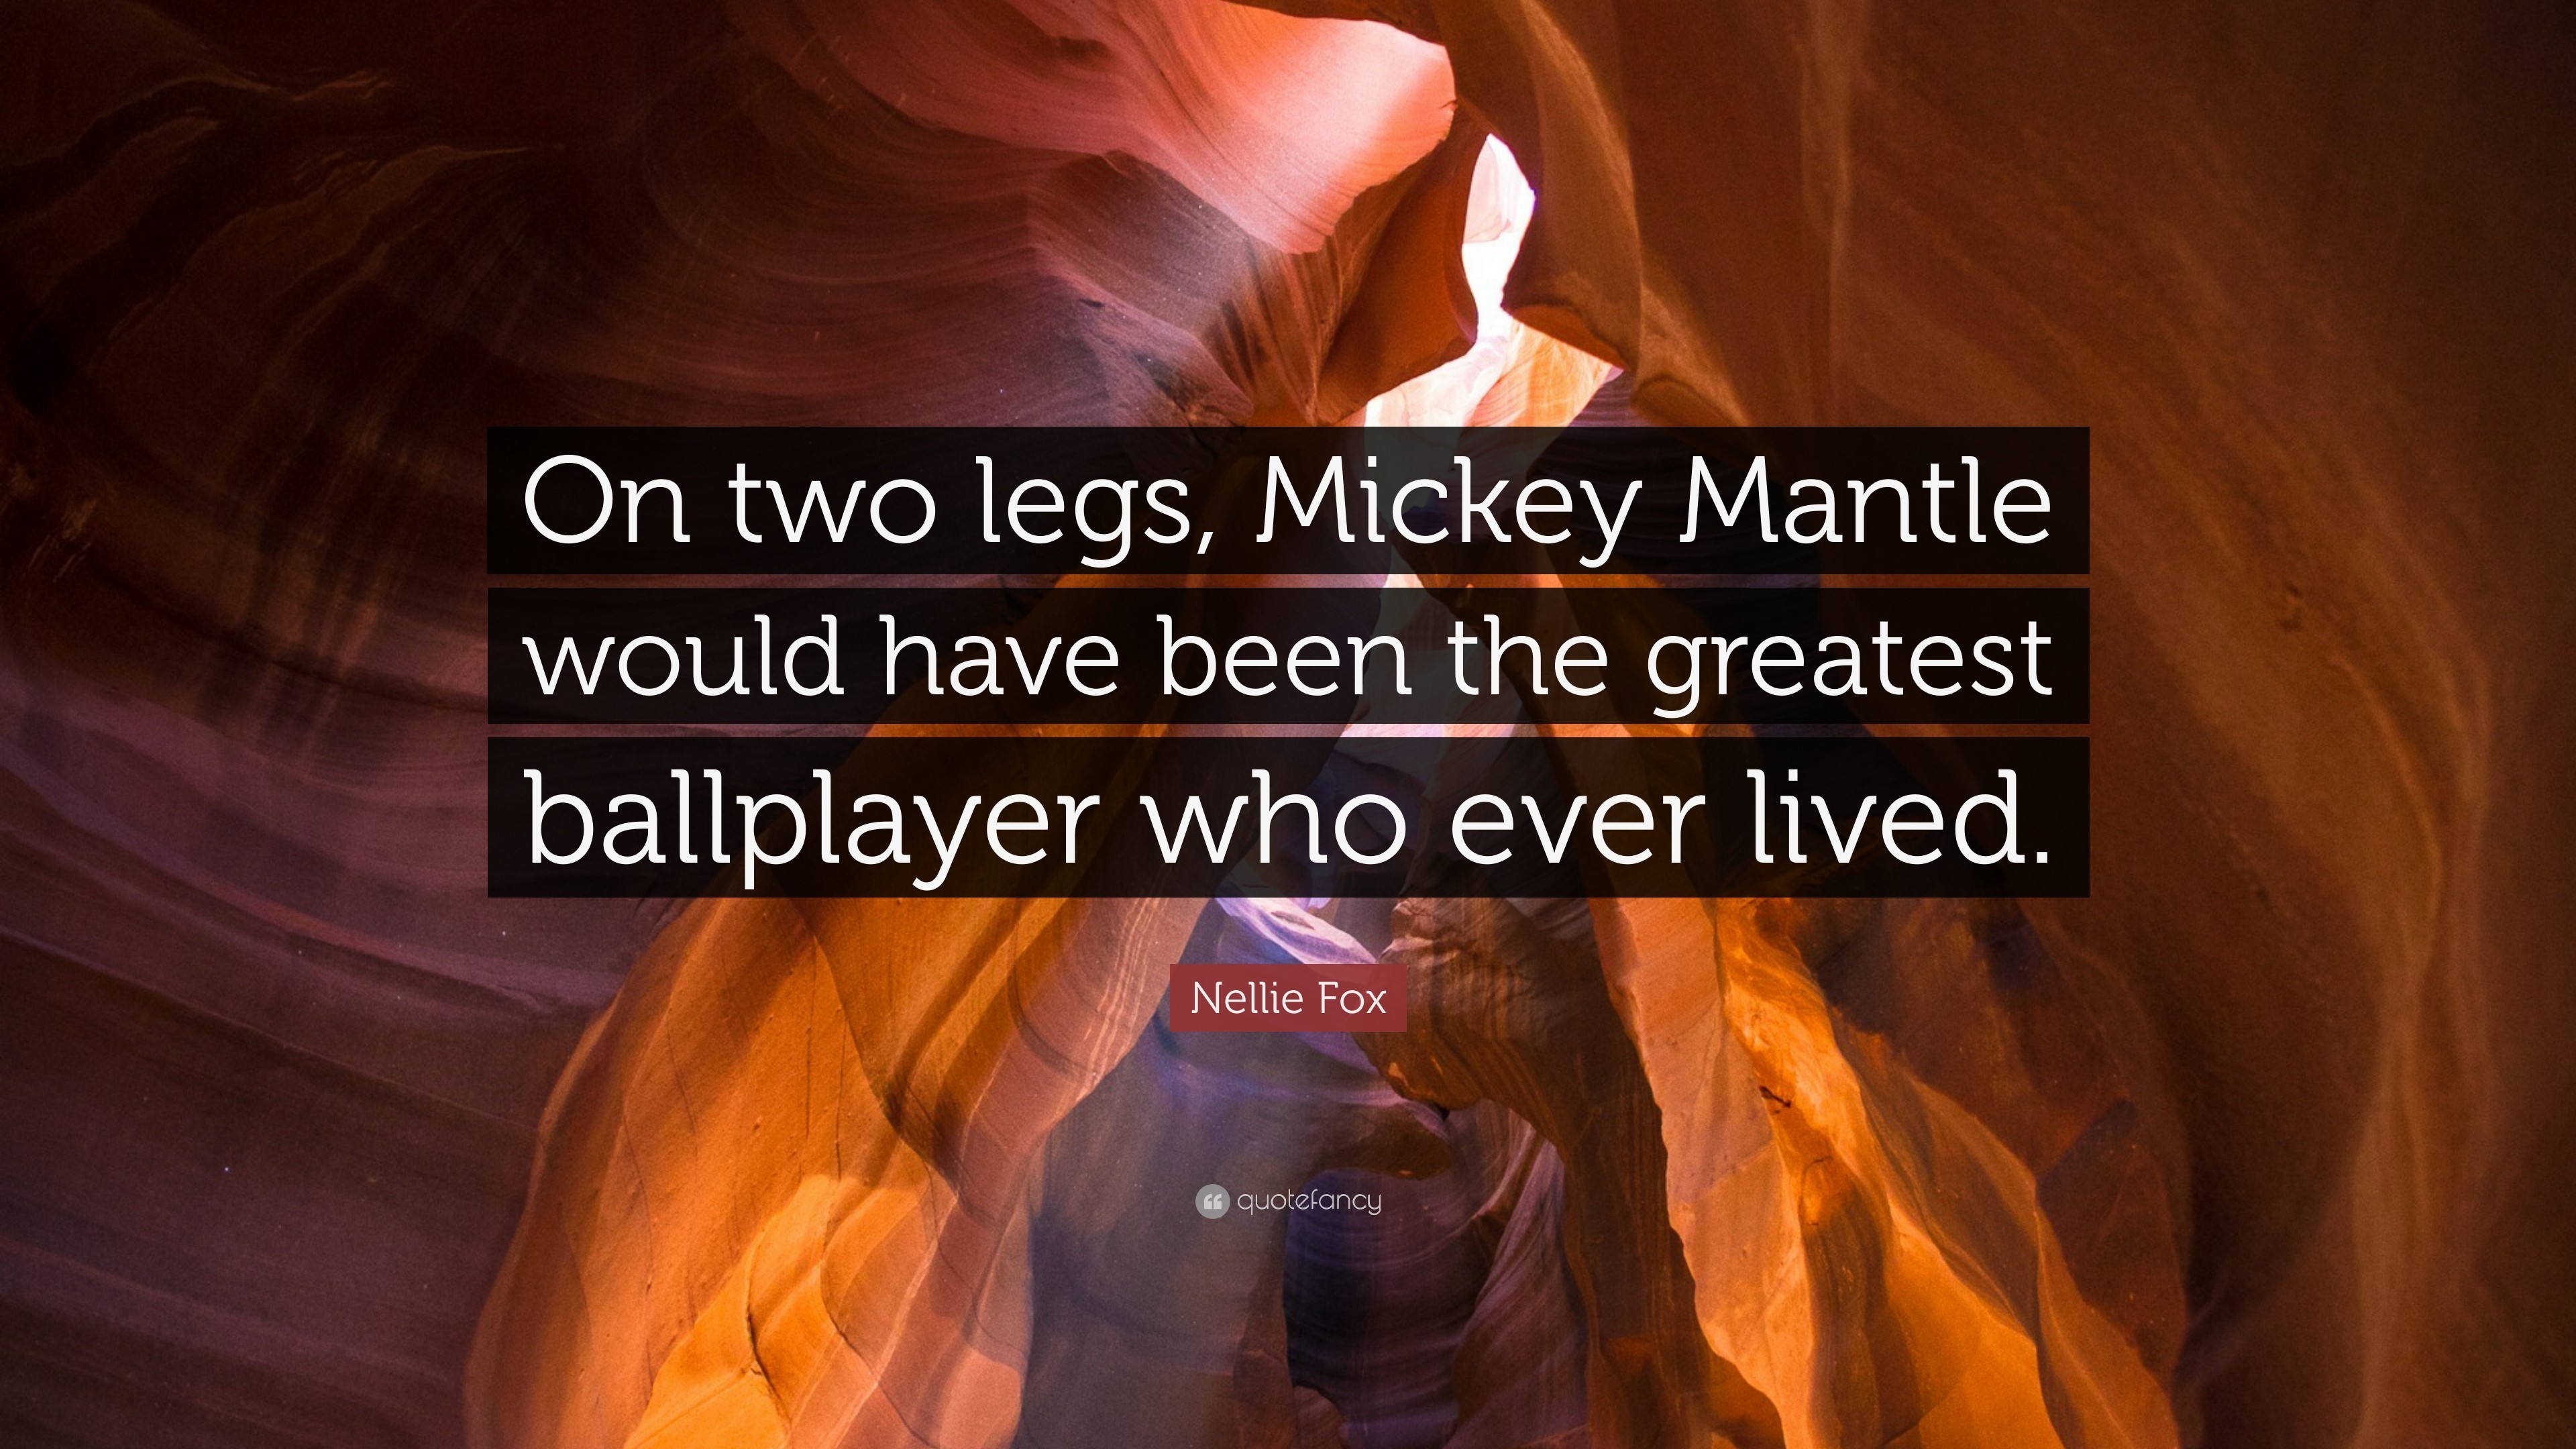 3840x2160 Nellie Fox Quote: “On two legs, Mickey Mantle would have been the greatest